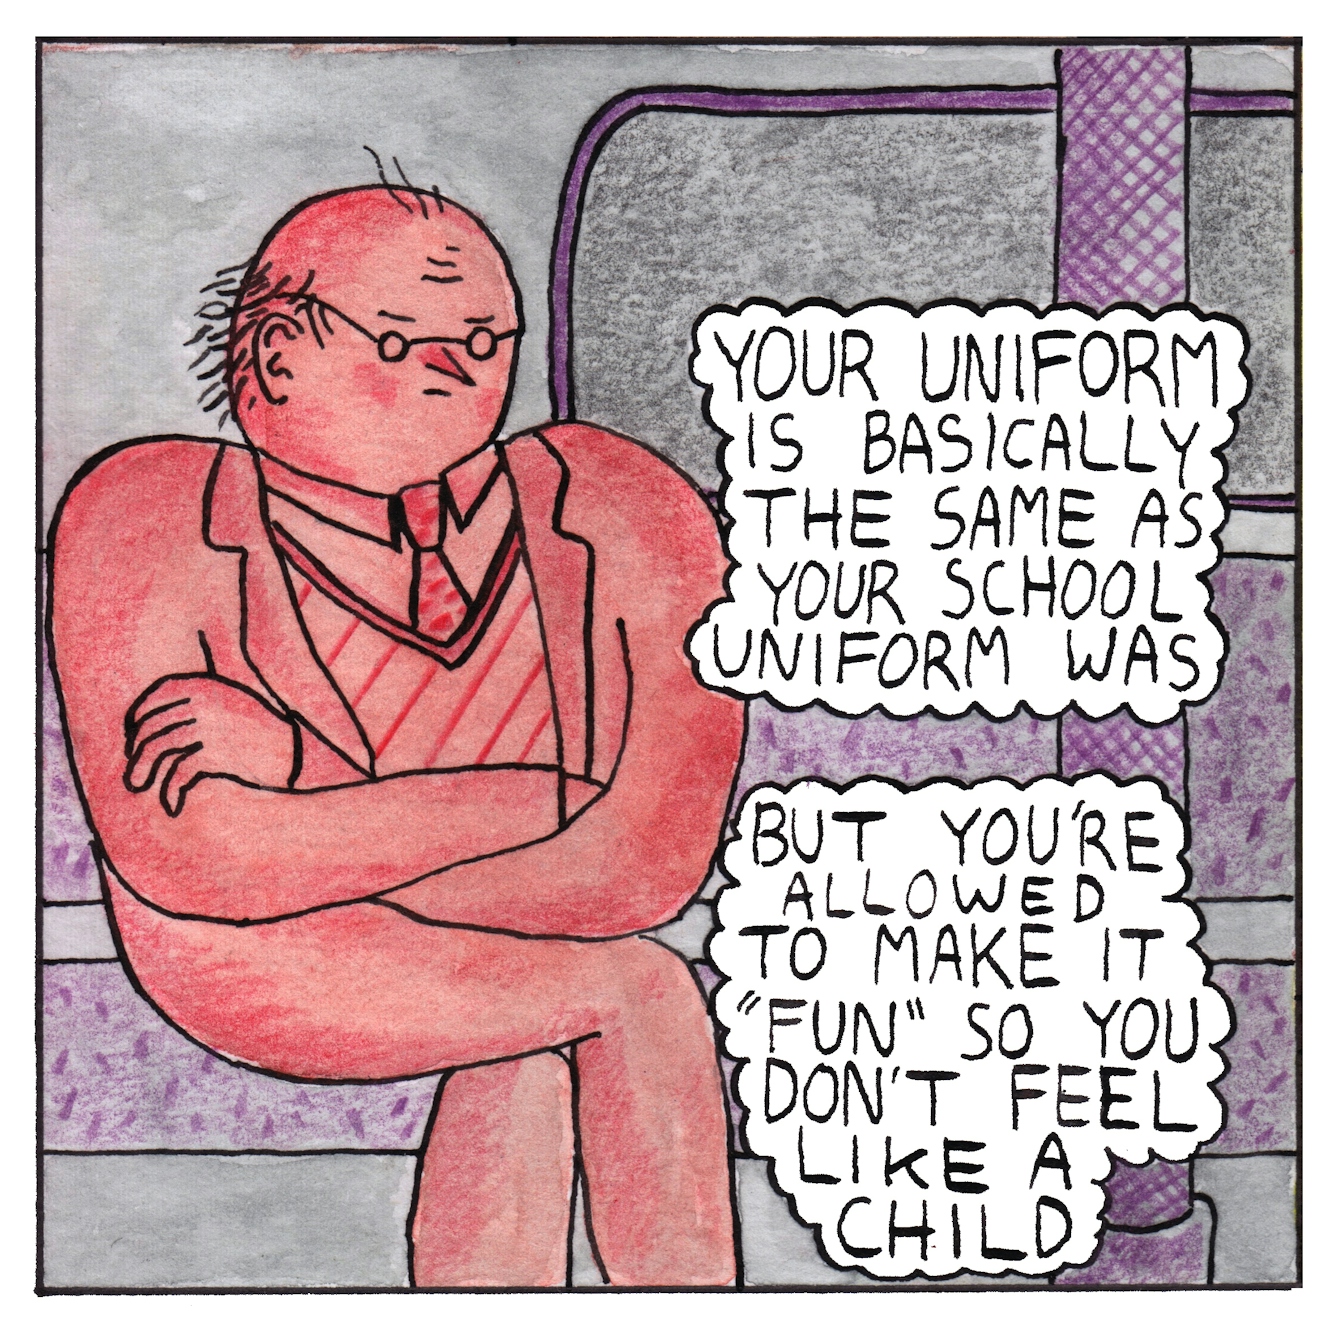 Panel 5 of a six-panel comic drawn with ink, watercolour and colour pencils: An annoyed red character, wearing small round glasses, a suit and a striped jumper and spotted tie, sits with their arms and legs crossed, alone in a grey tube (subway) train carriage. Two text bubbles reads: "Your uniform is basically the same as your school uniform was. But you're allowed to make it 'fun' so you don't feel like a child"